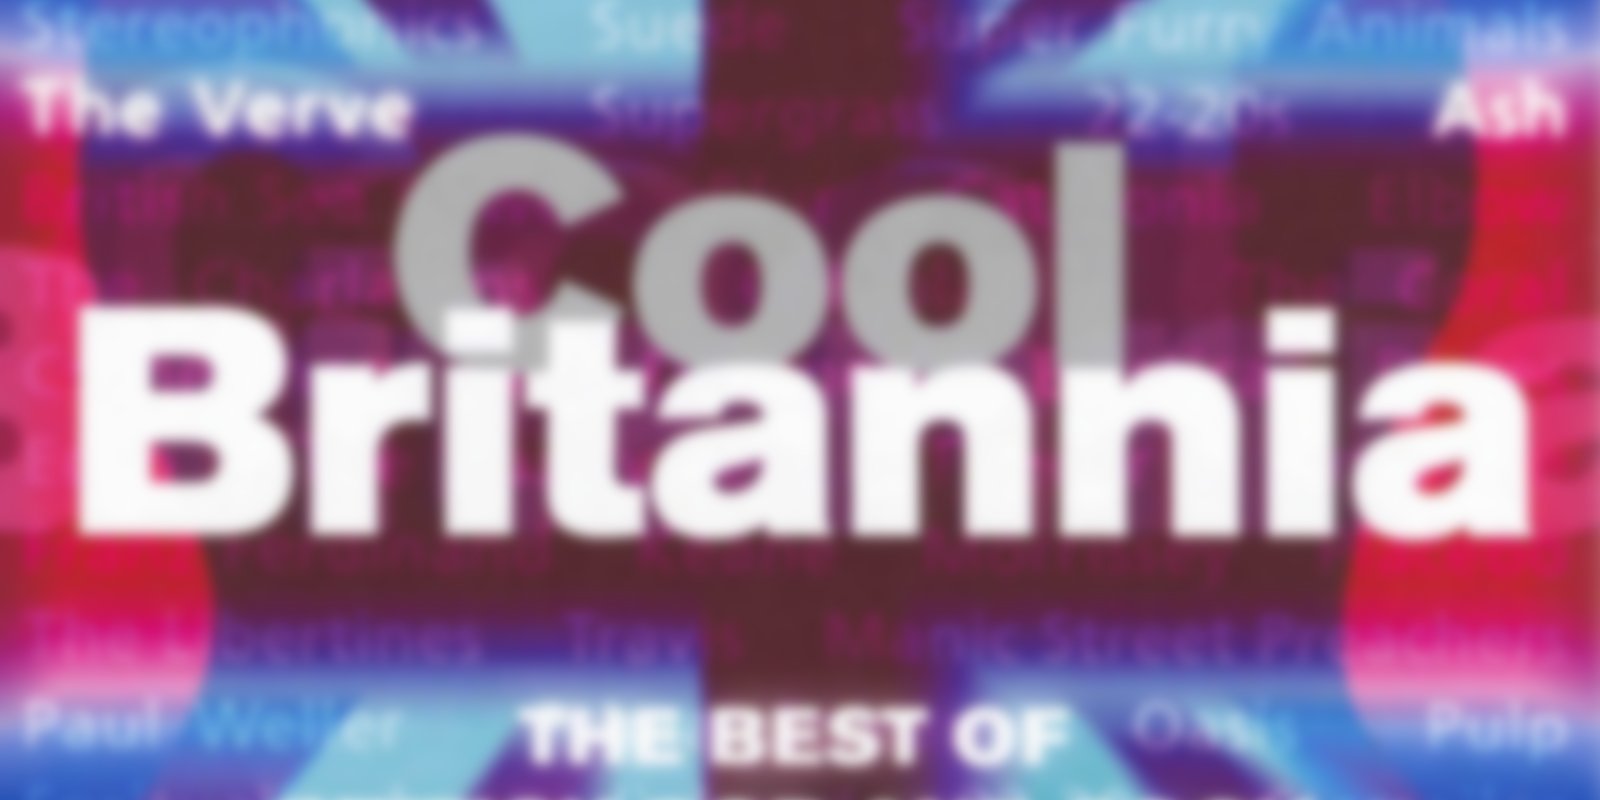 Later with Jools Holland - Cool Britannia